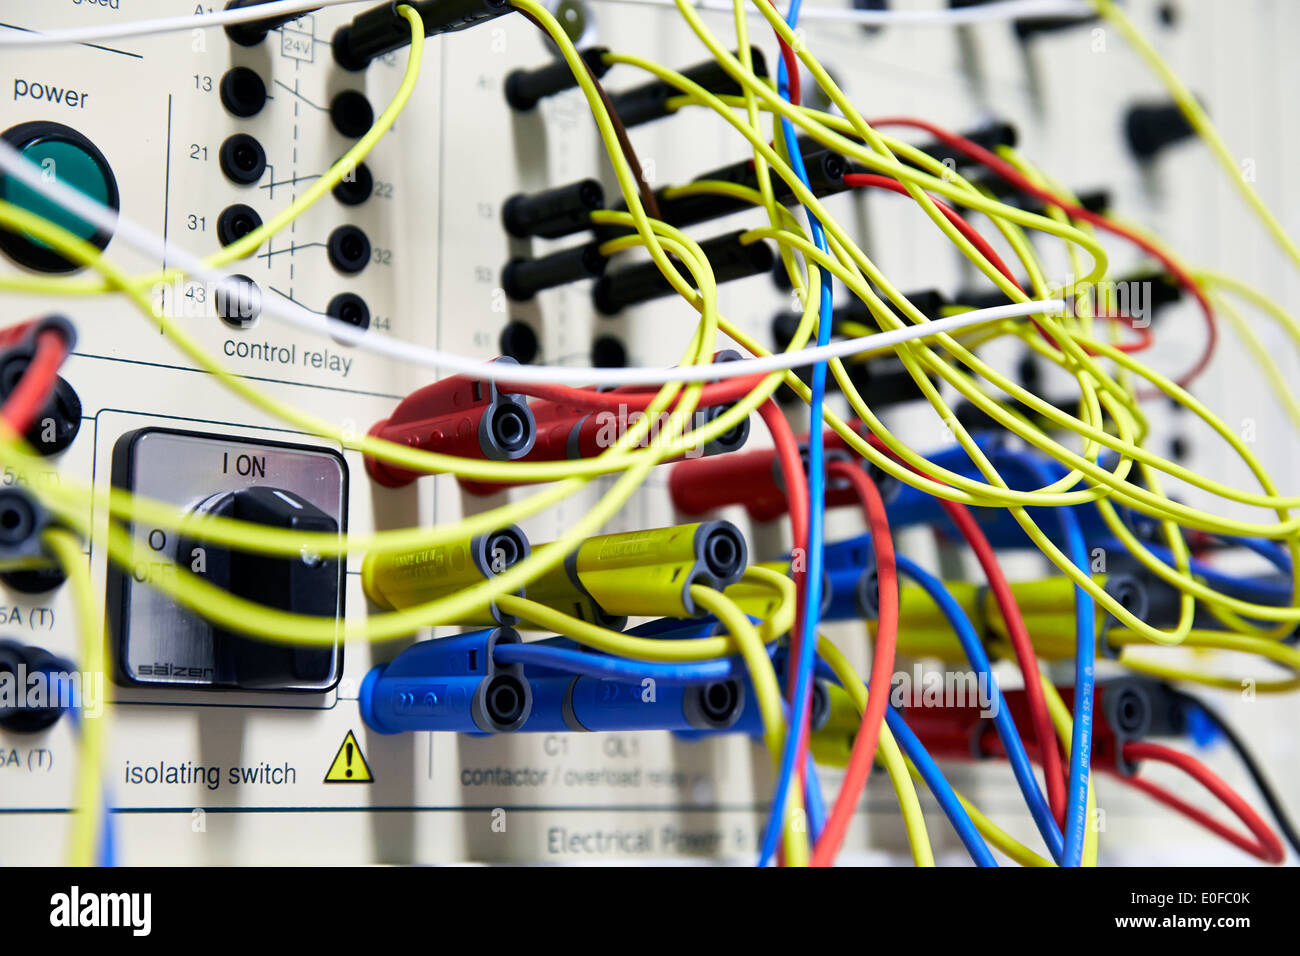 Commercial and industrial wires switches and plugs pictured in a manufacturing plant Stock Photo